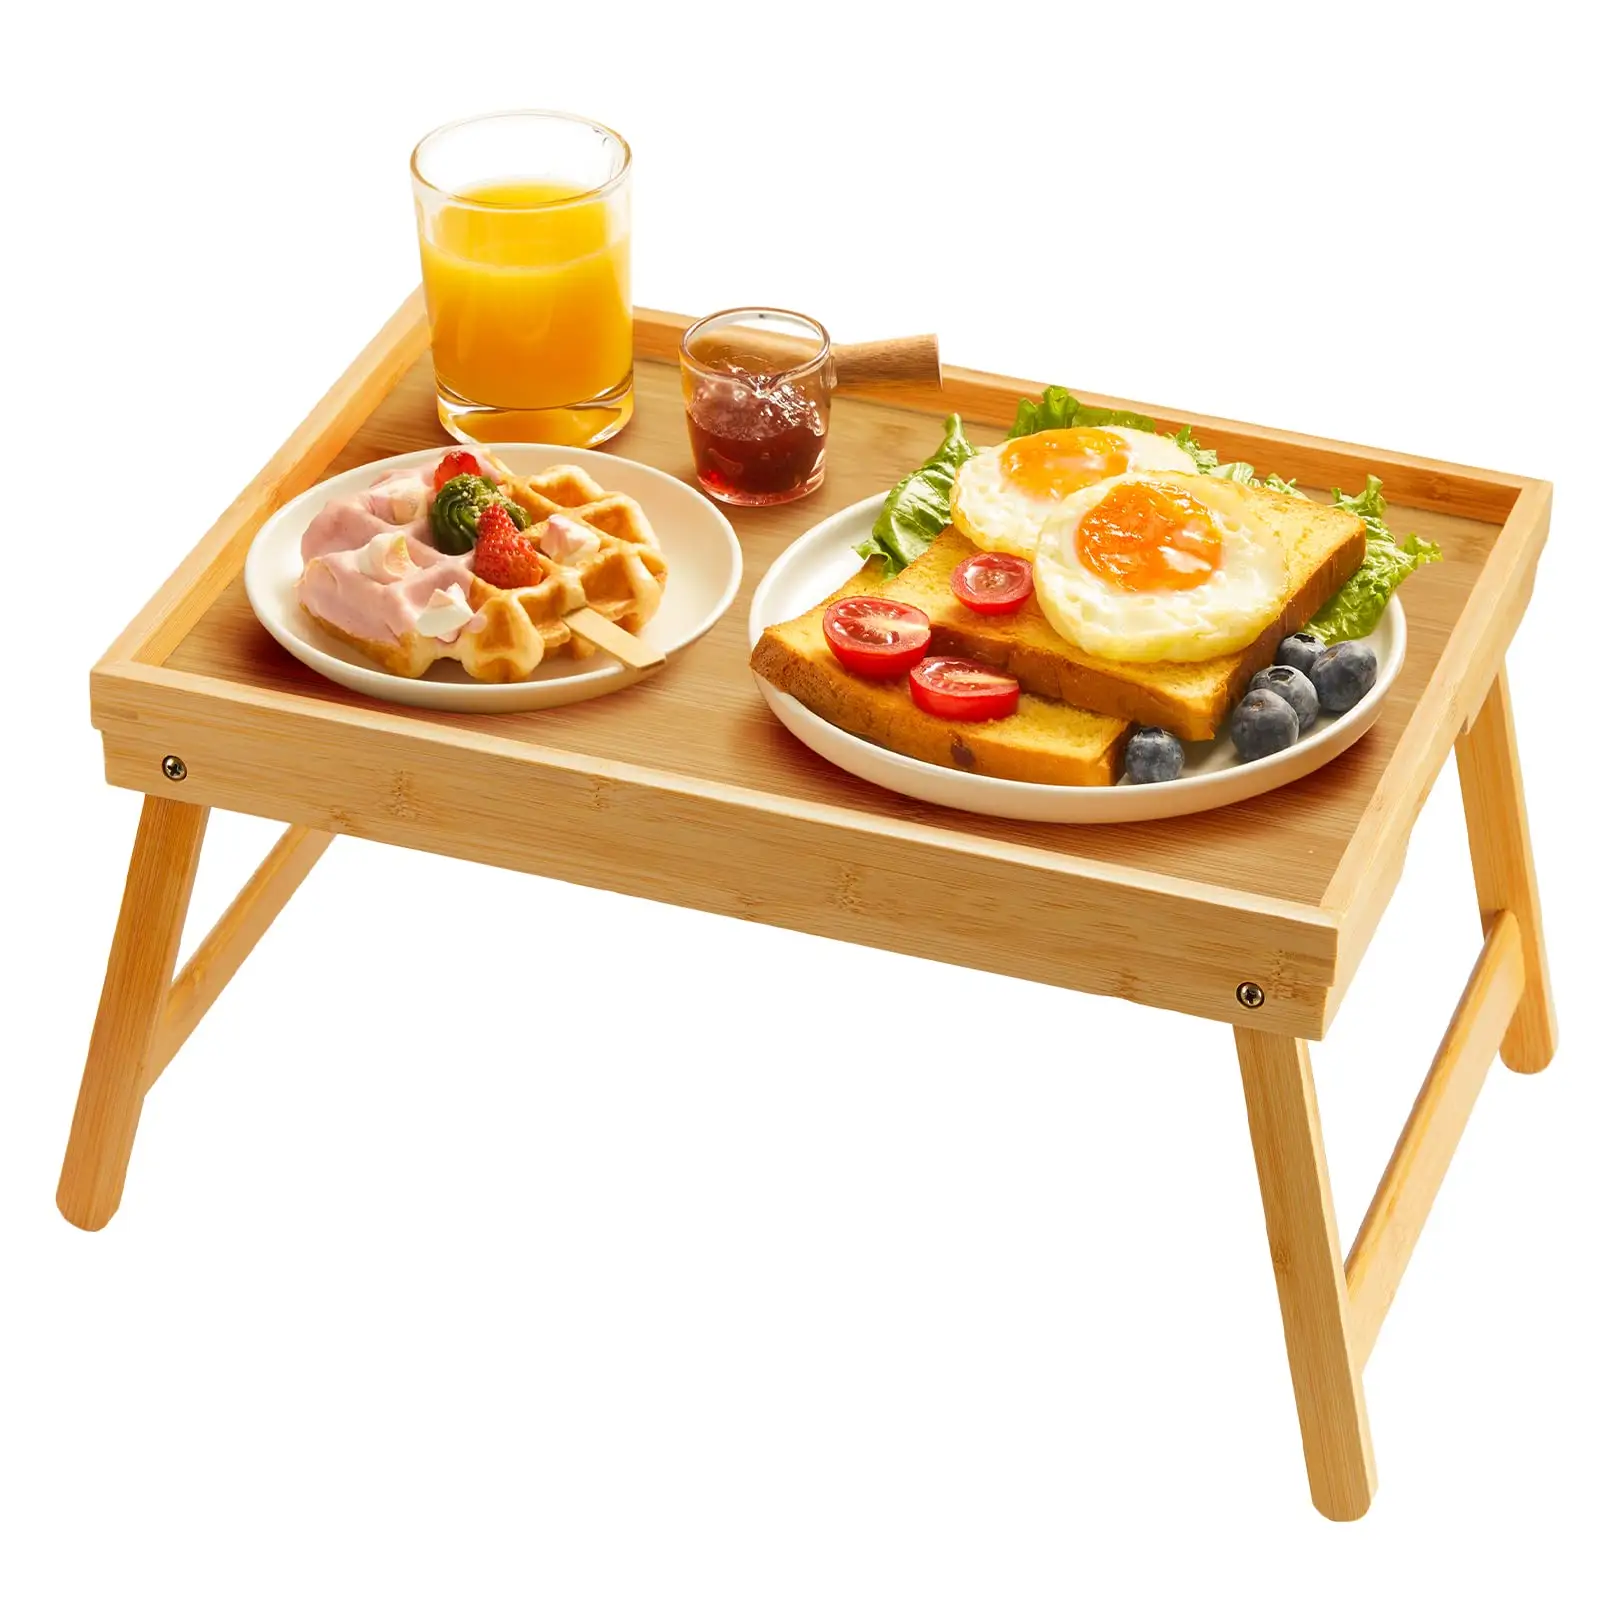 Bamboo Bed Tray Table with Foldable Legs Wood Laptop Desk Snack Tray for Sofa Bed Eating Working